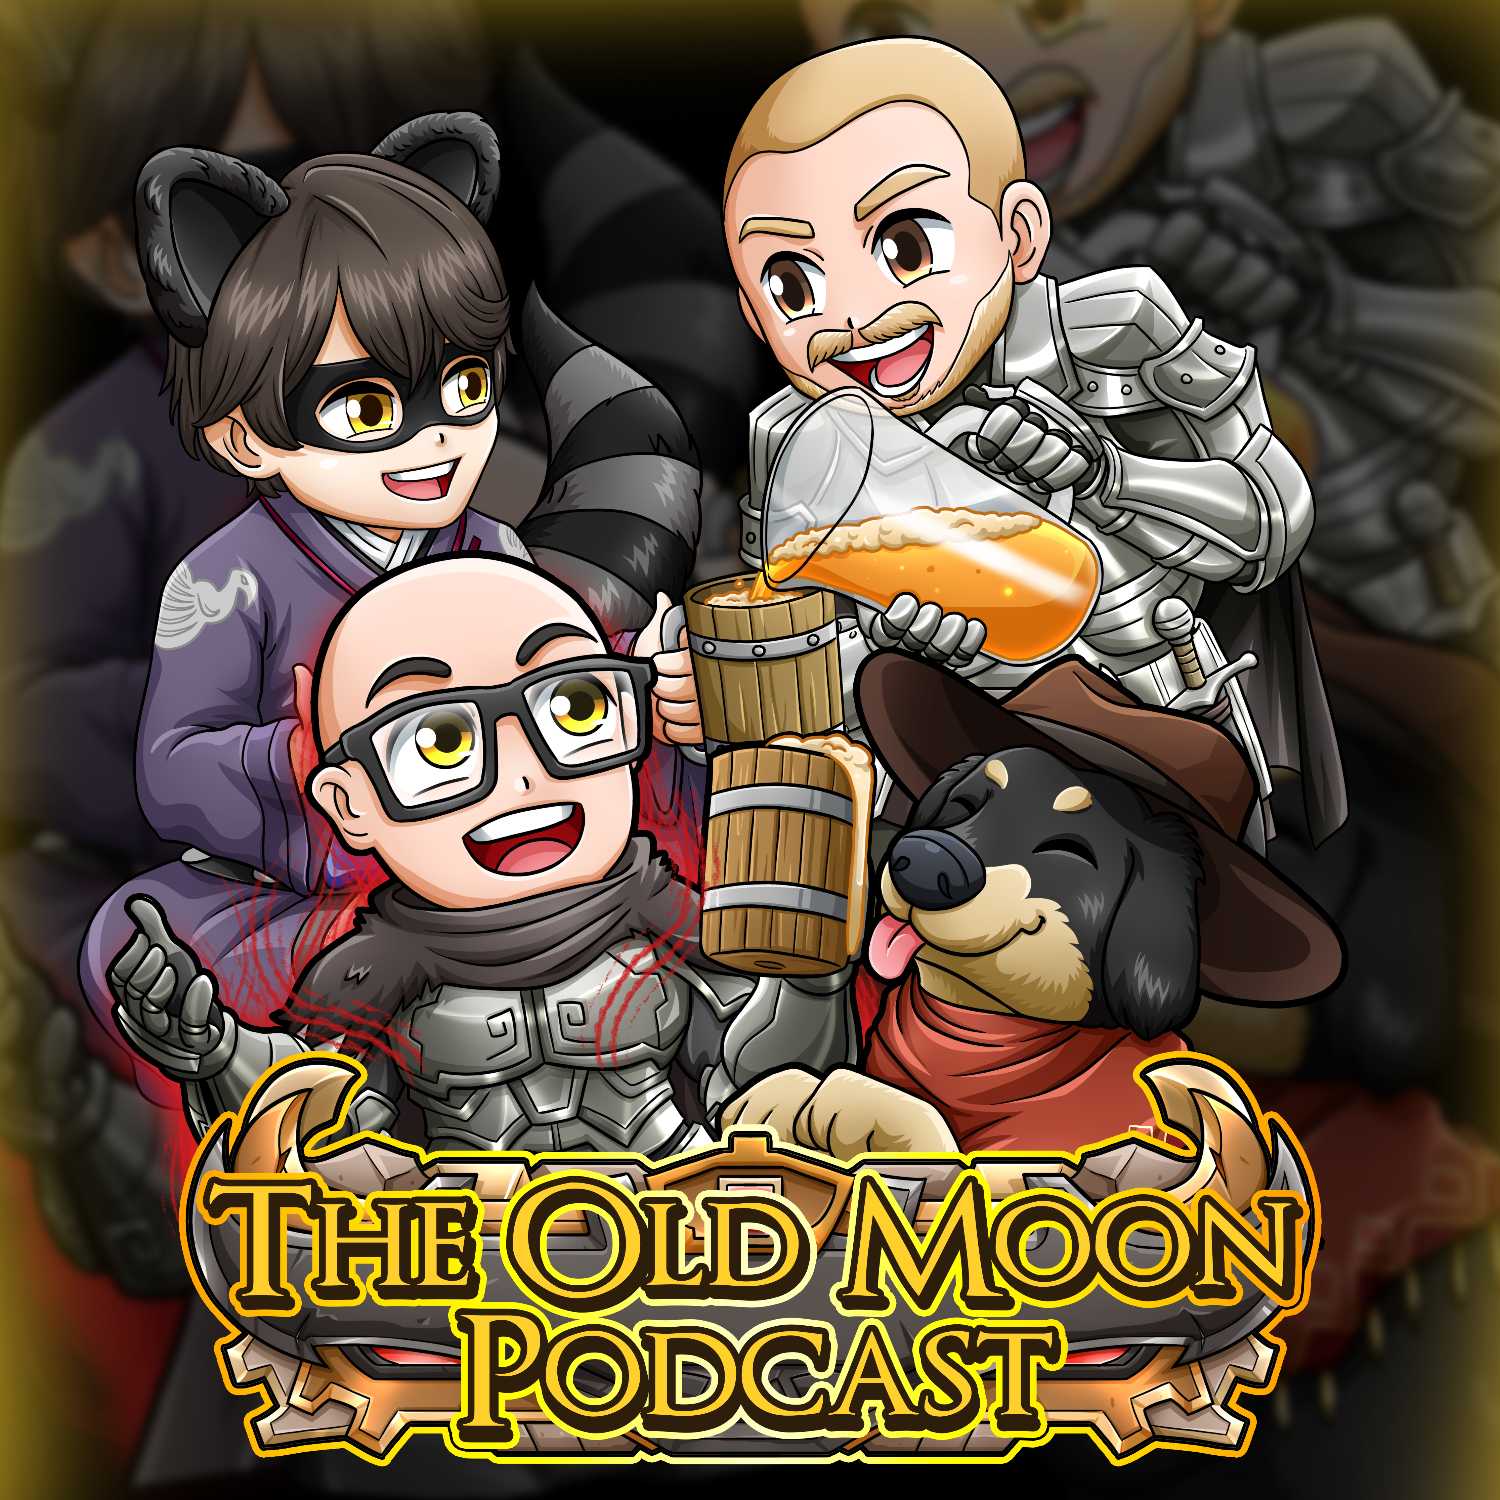 The Old Moon Podcast